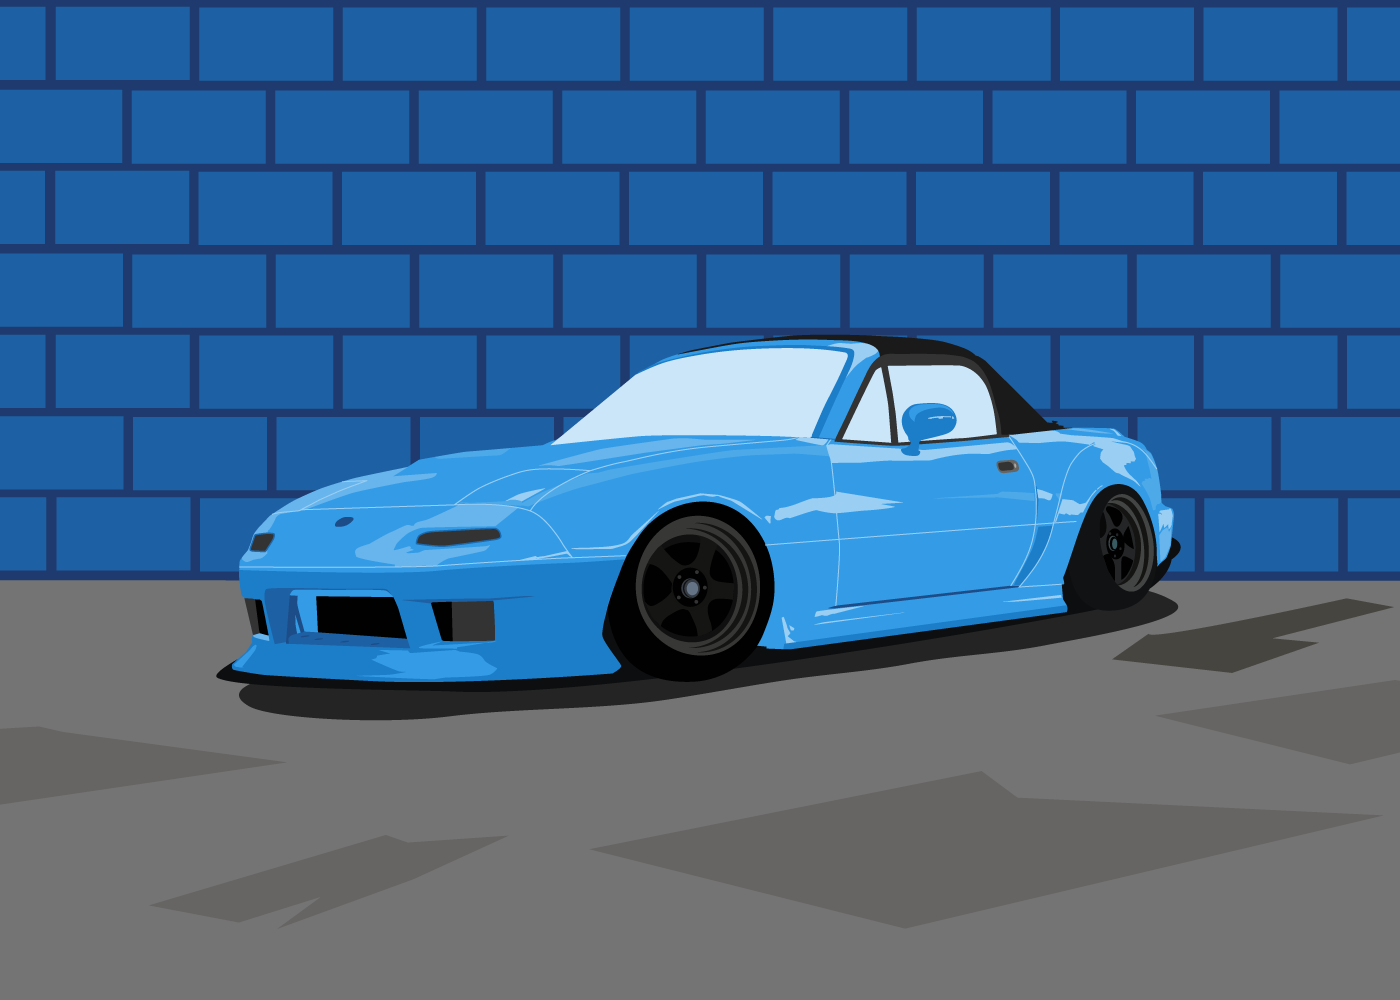 Illustration of a modified car